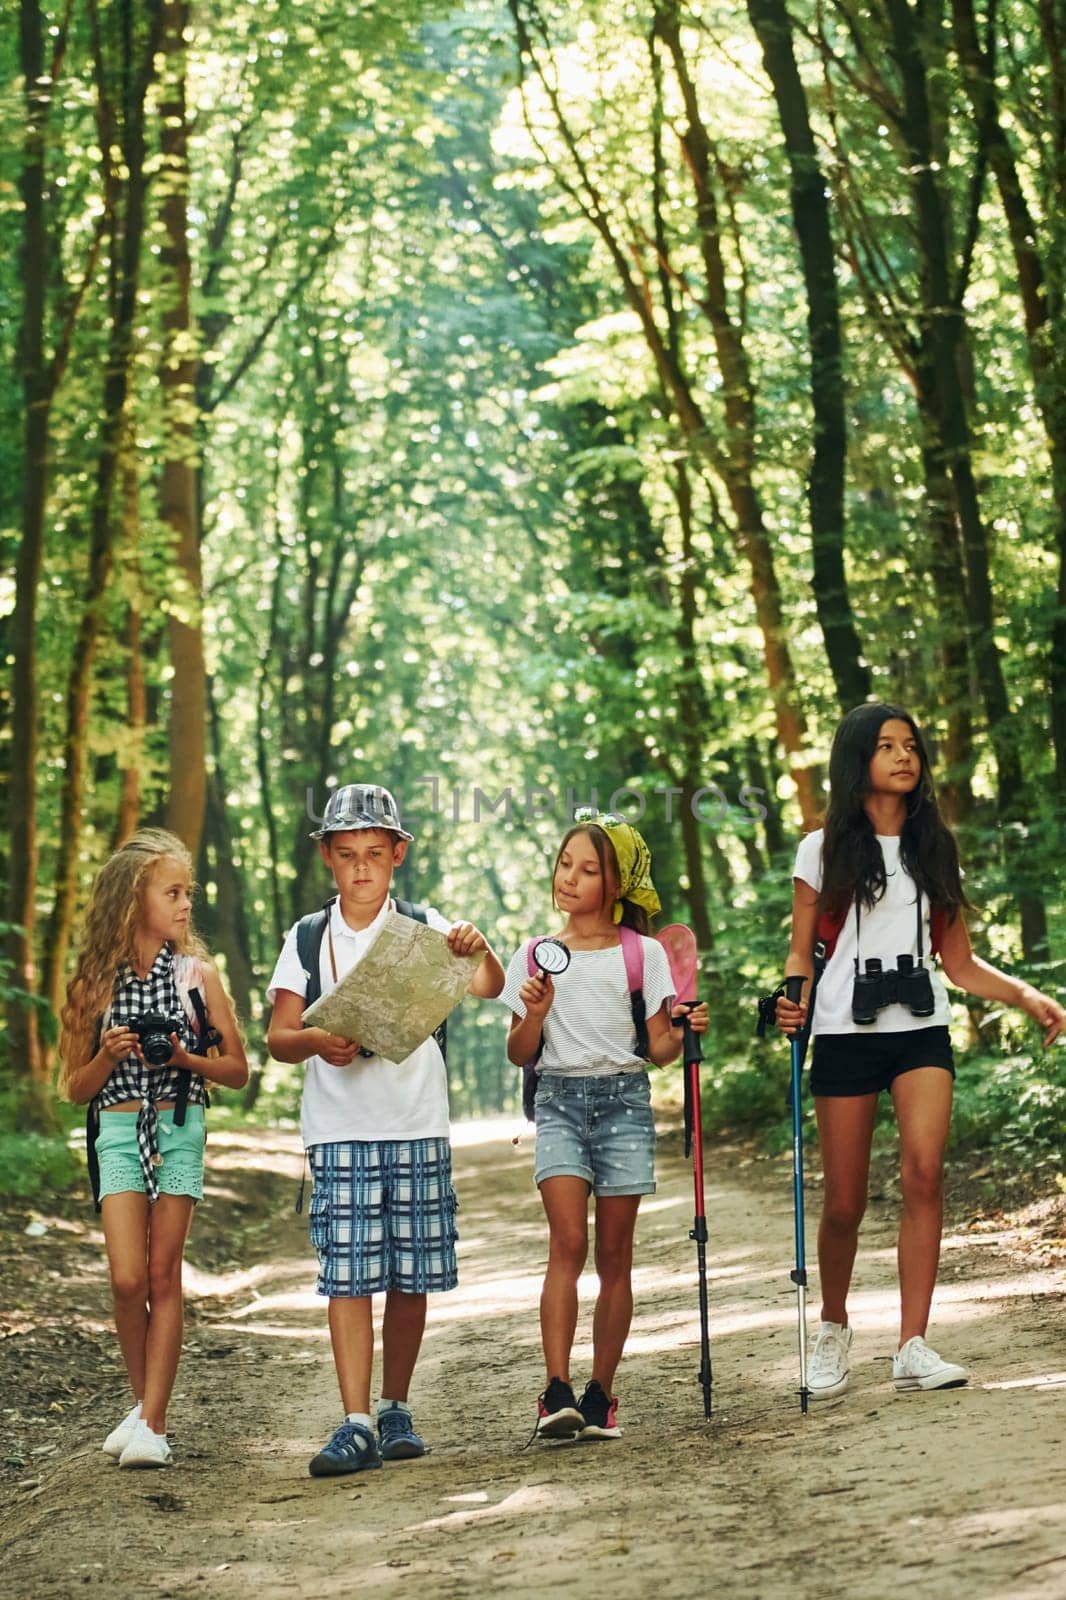 With map. Kids strolling in the forest with travel equipment by Standret